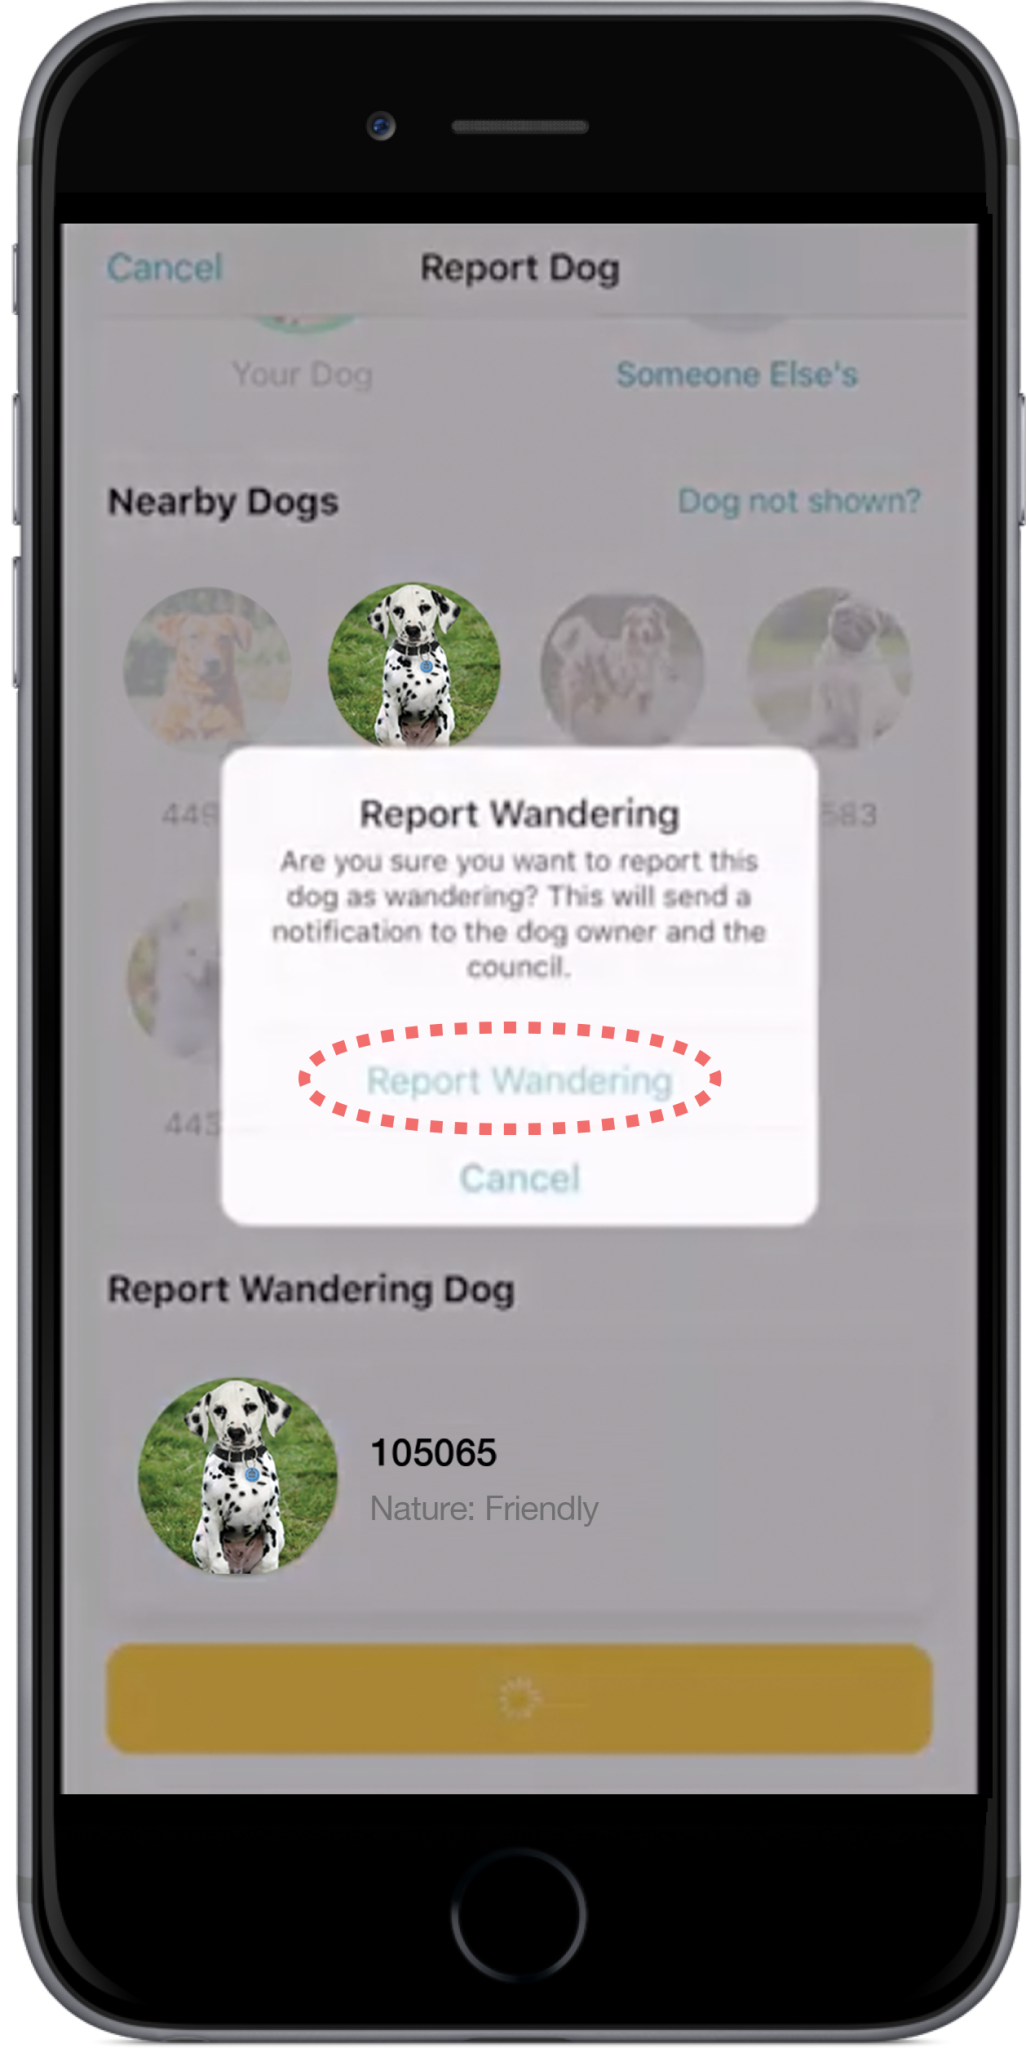 Doggone’s ‘Report a Wandering Dog’ feature has been met with great enthusiasm! Not only does it allow dog owners with the App to assist in reuniting lost dogs with their owners, it also allows members of the wider community to actively assist in the reuniting process – all they need is the App installed on their phone.